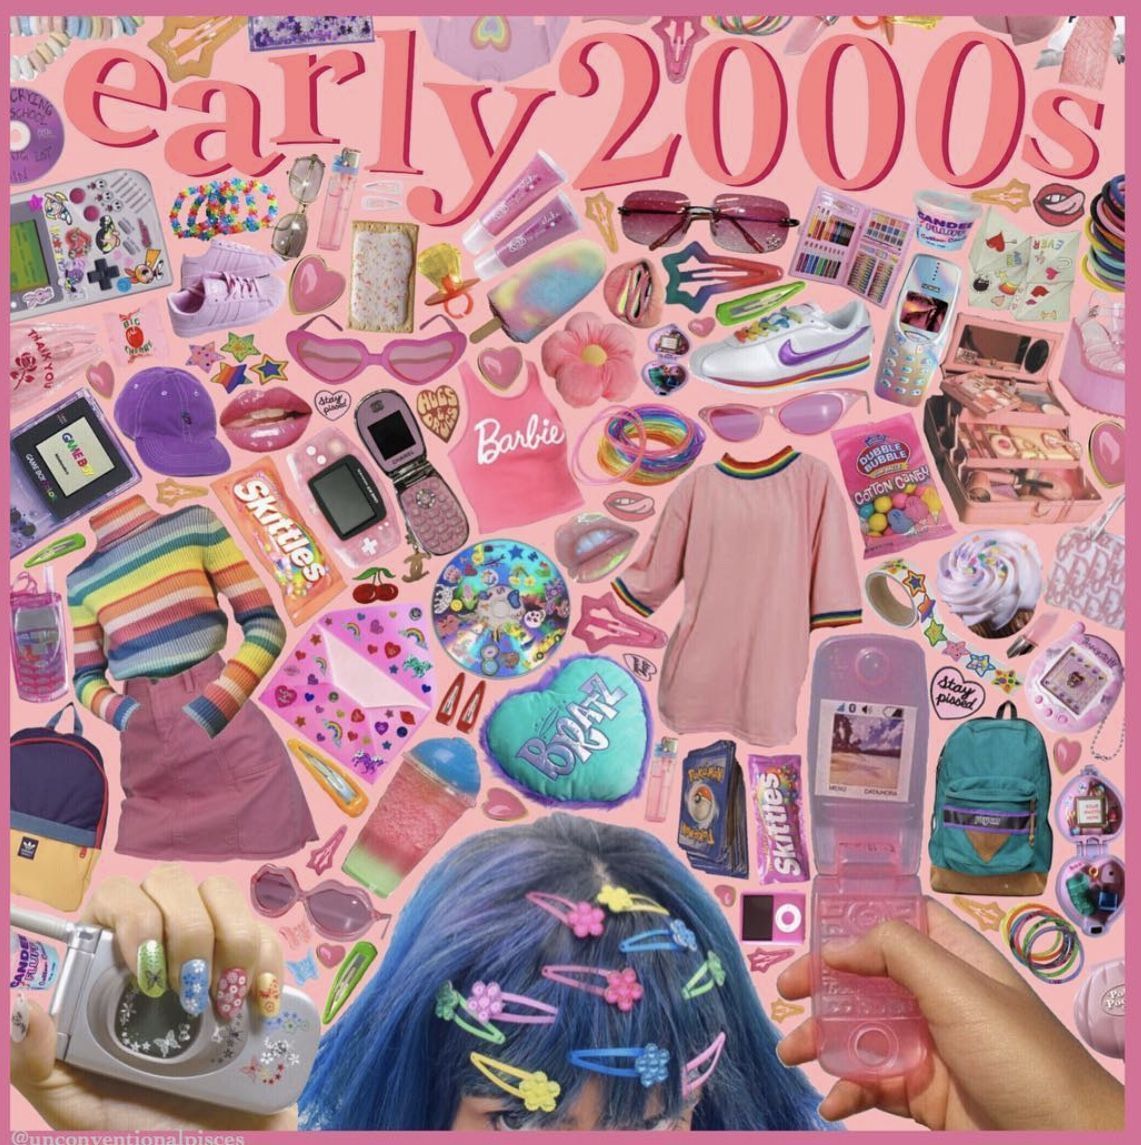 A collage of early 2000s items including a barbie, hair clips, a pink shirt, and a cell phone. - 2000s